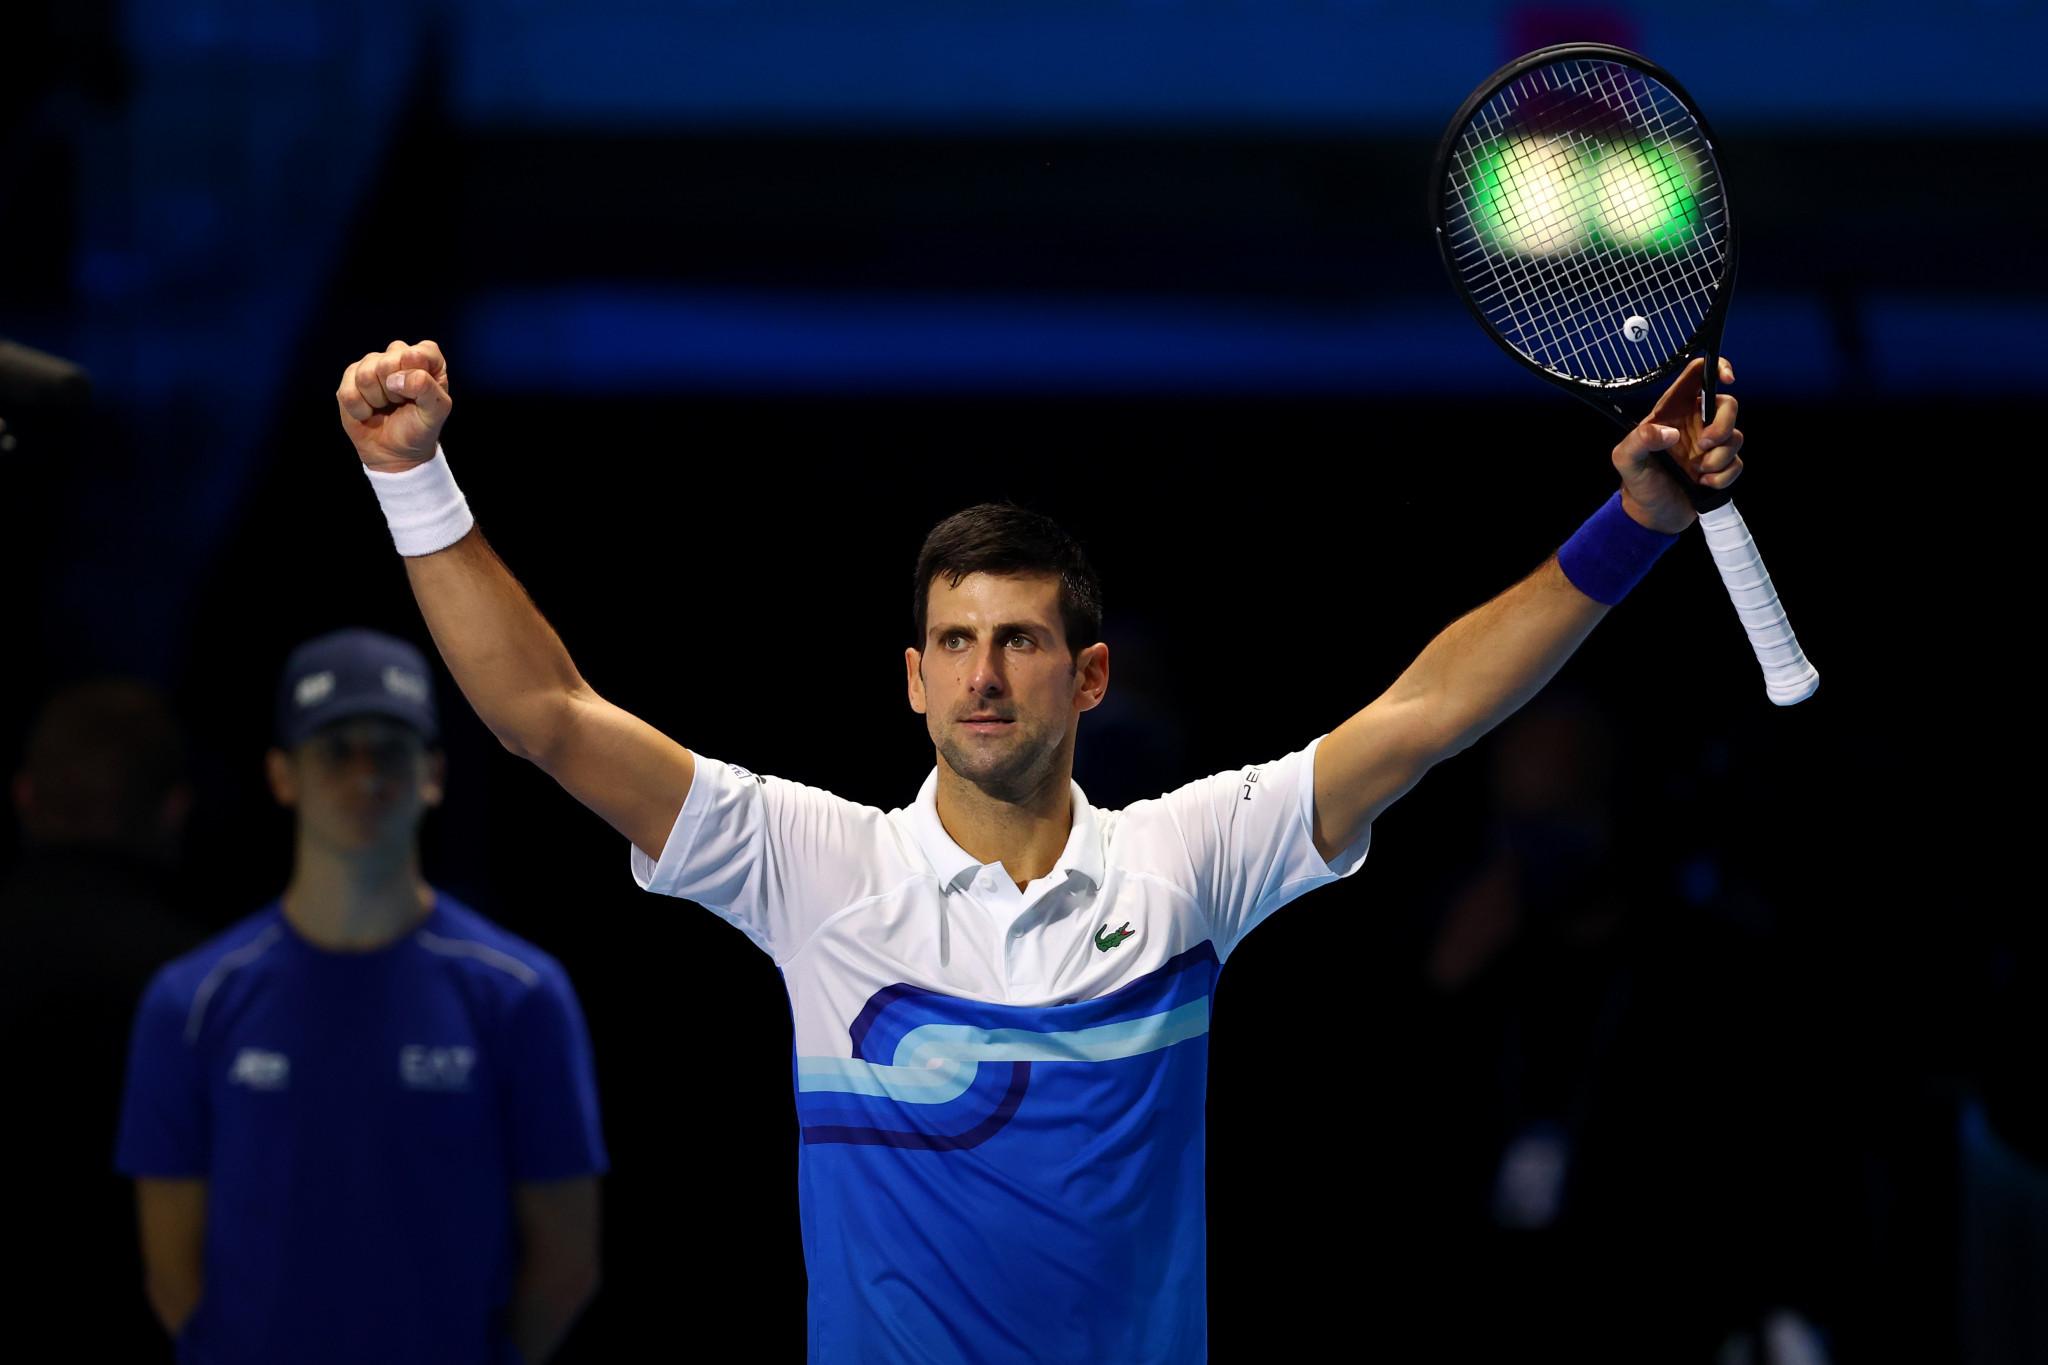 Novak Djokovic secured his place in the final four of the ATP Finals with victory over Andrey Rublev ©Getty Images